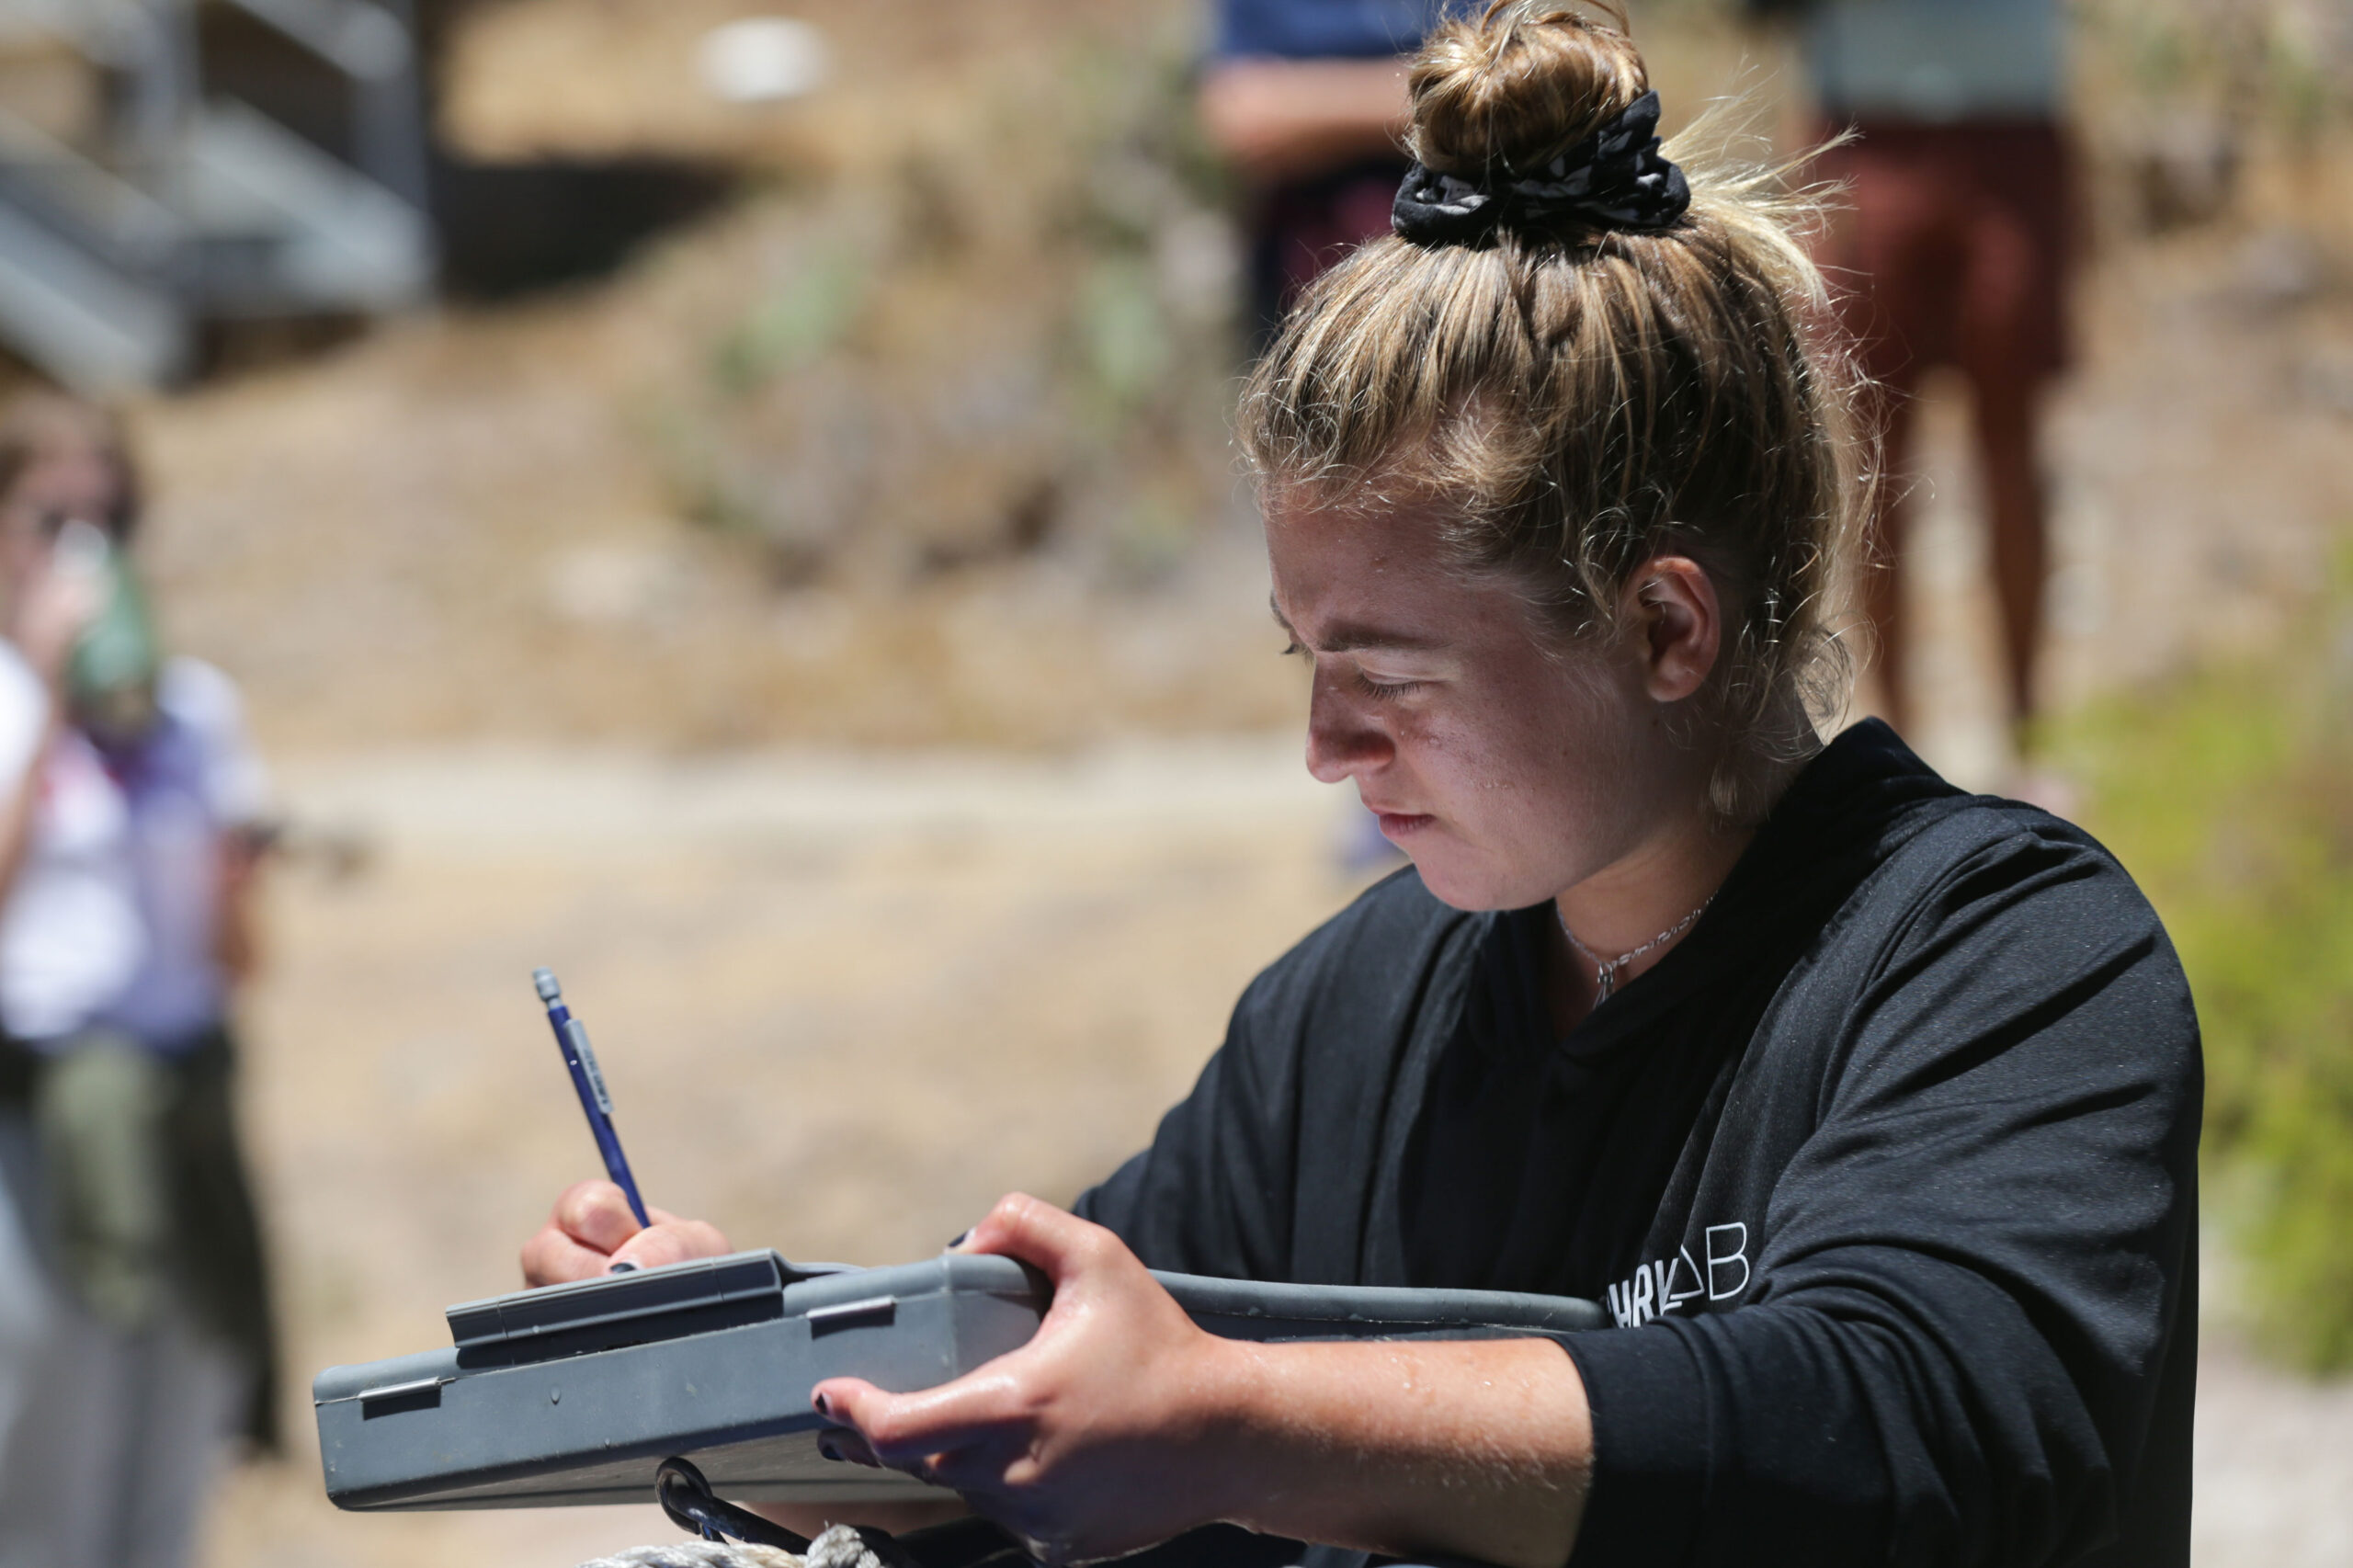 a person wearing a black shirt takes notes on a boxy metal clipboard